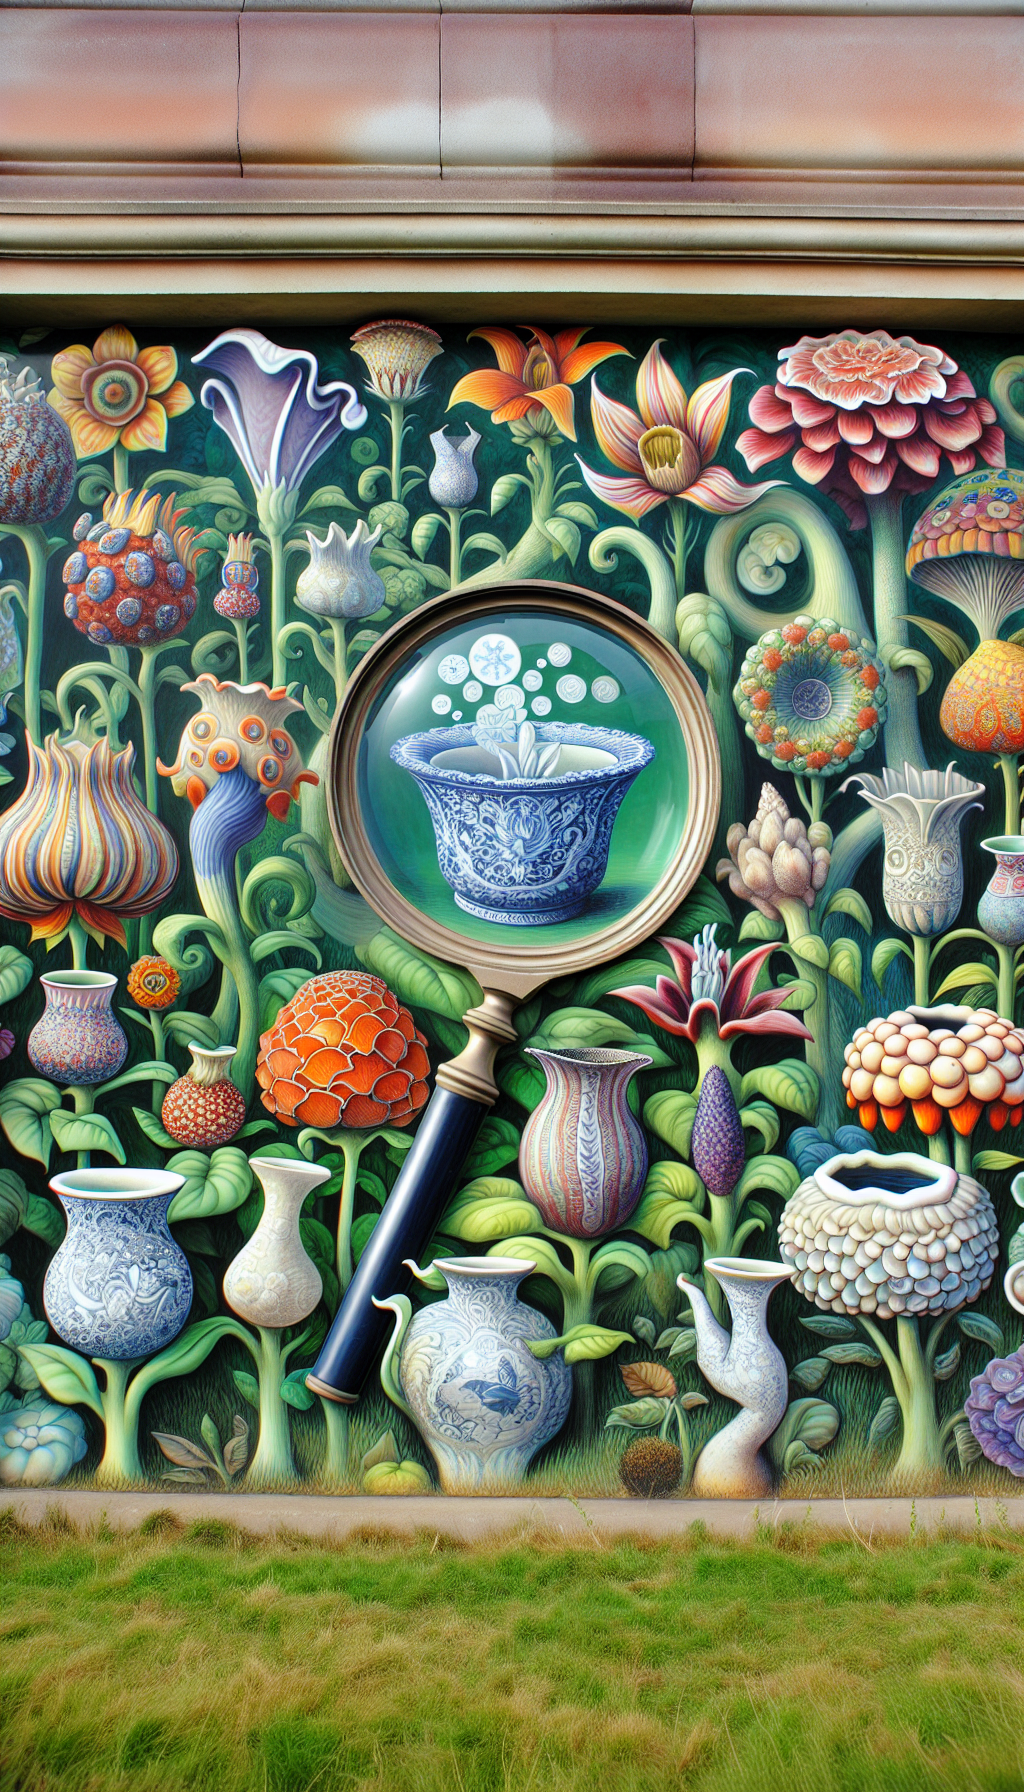 An illustration depicts a whimsical garden where vintage CorningWare pieces blossom like flowers; each petal delicately adorned with distinct, rare patterns. In the center, a magnifying glass hovers over a particularly ornate specimen, symbolic of identification, with its unique motif glowing under scrutiny. The garden seamlessly transitions from classic floral designs to the rare fanciful shapes, echoing the evolution of CorningWare artistry.